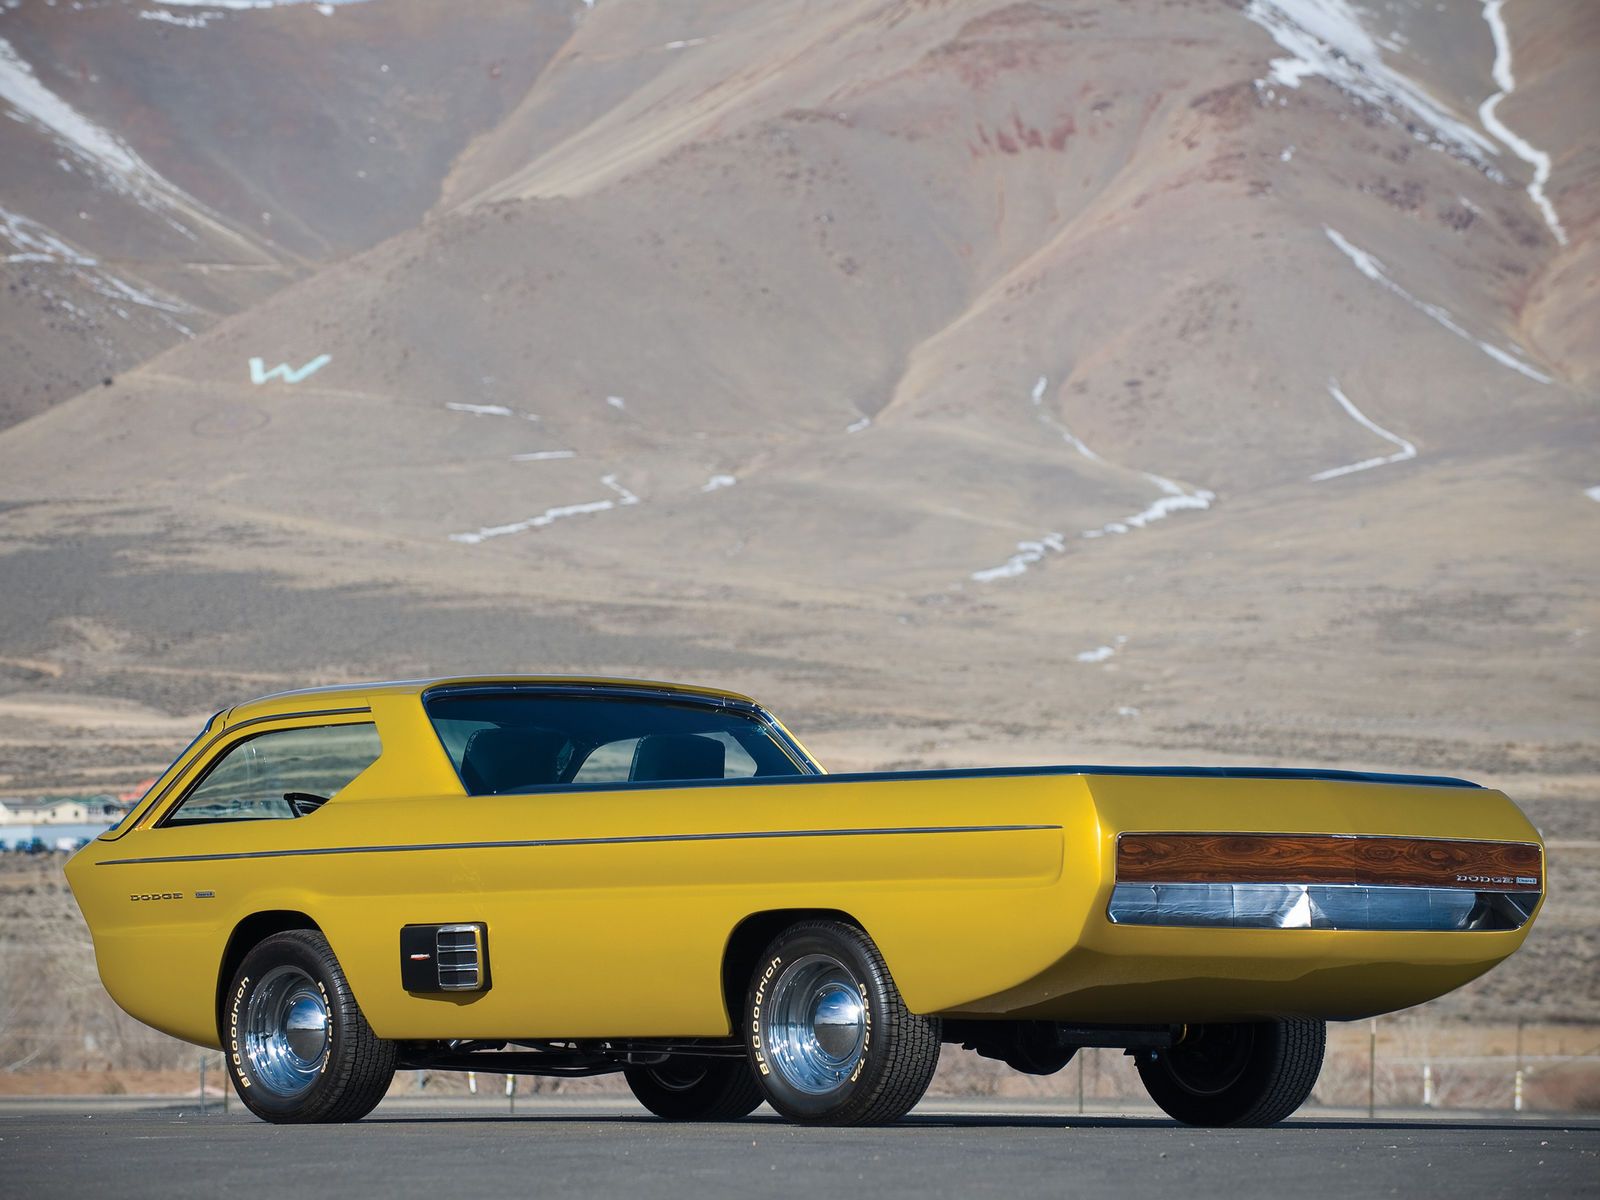 30 incredibly bonkers and beautiful cars from the 1950s to now image 11